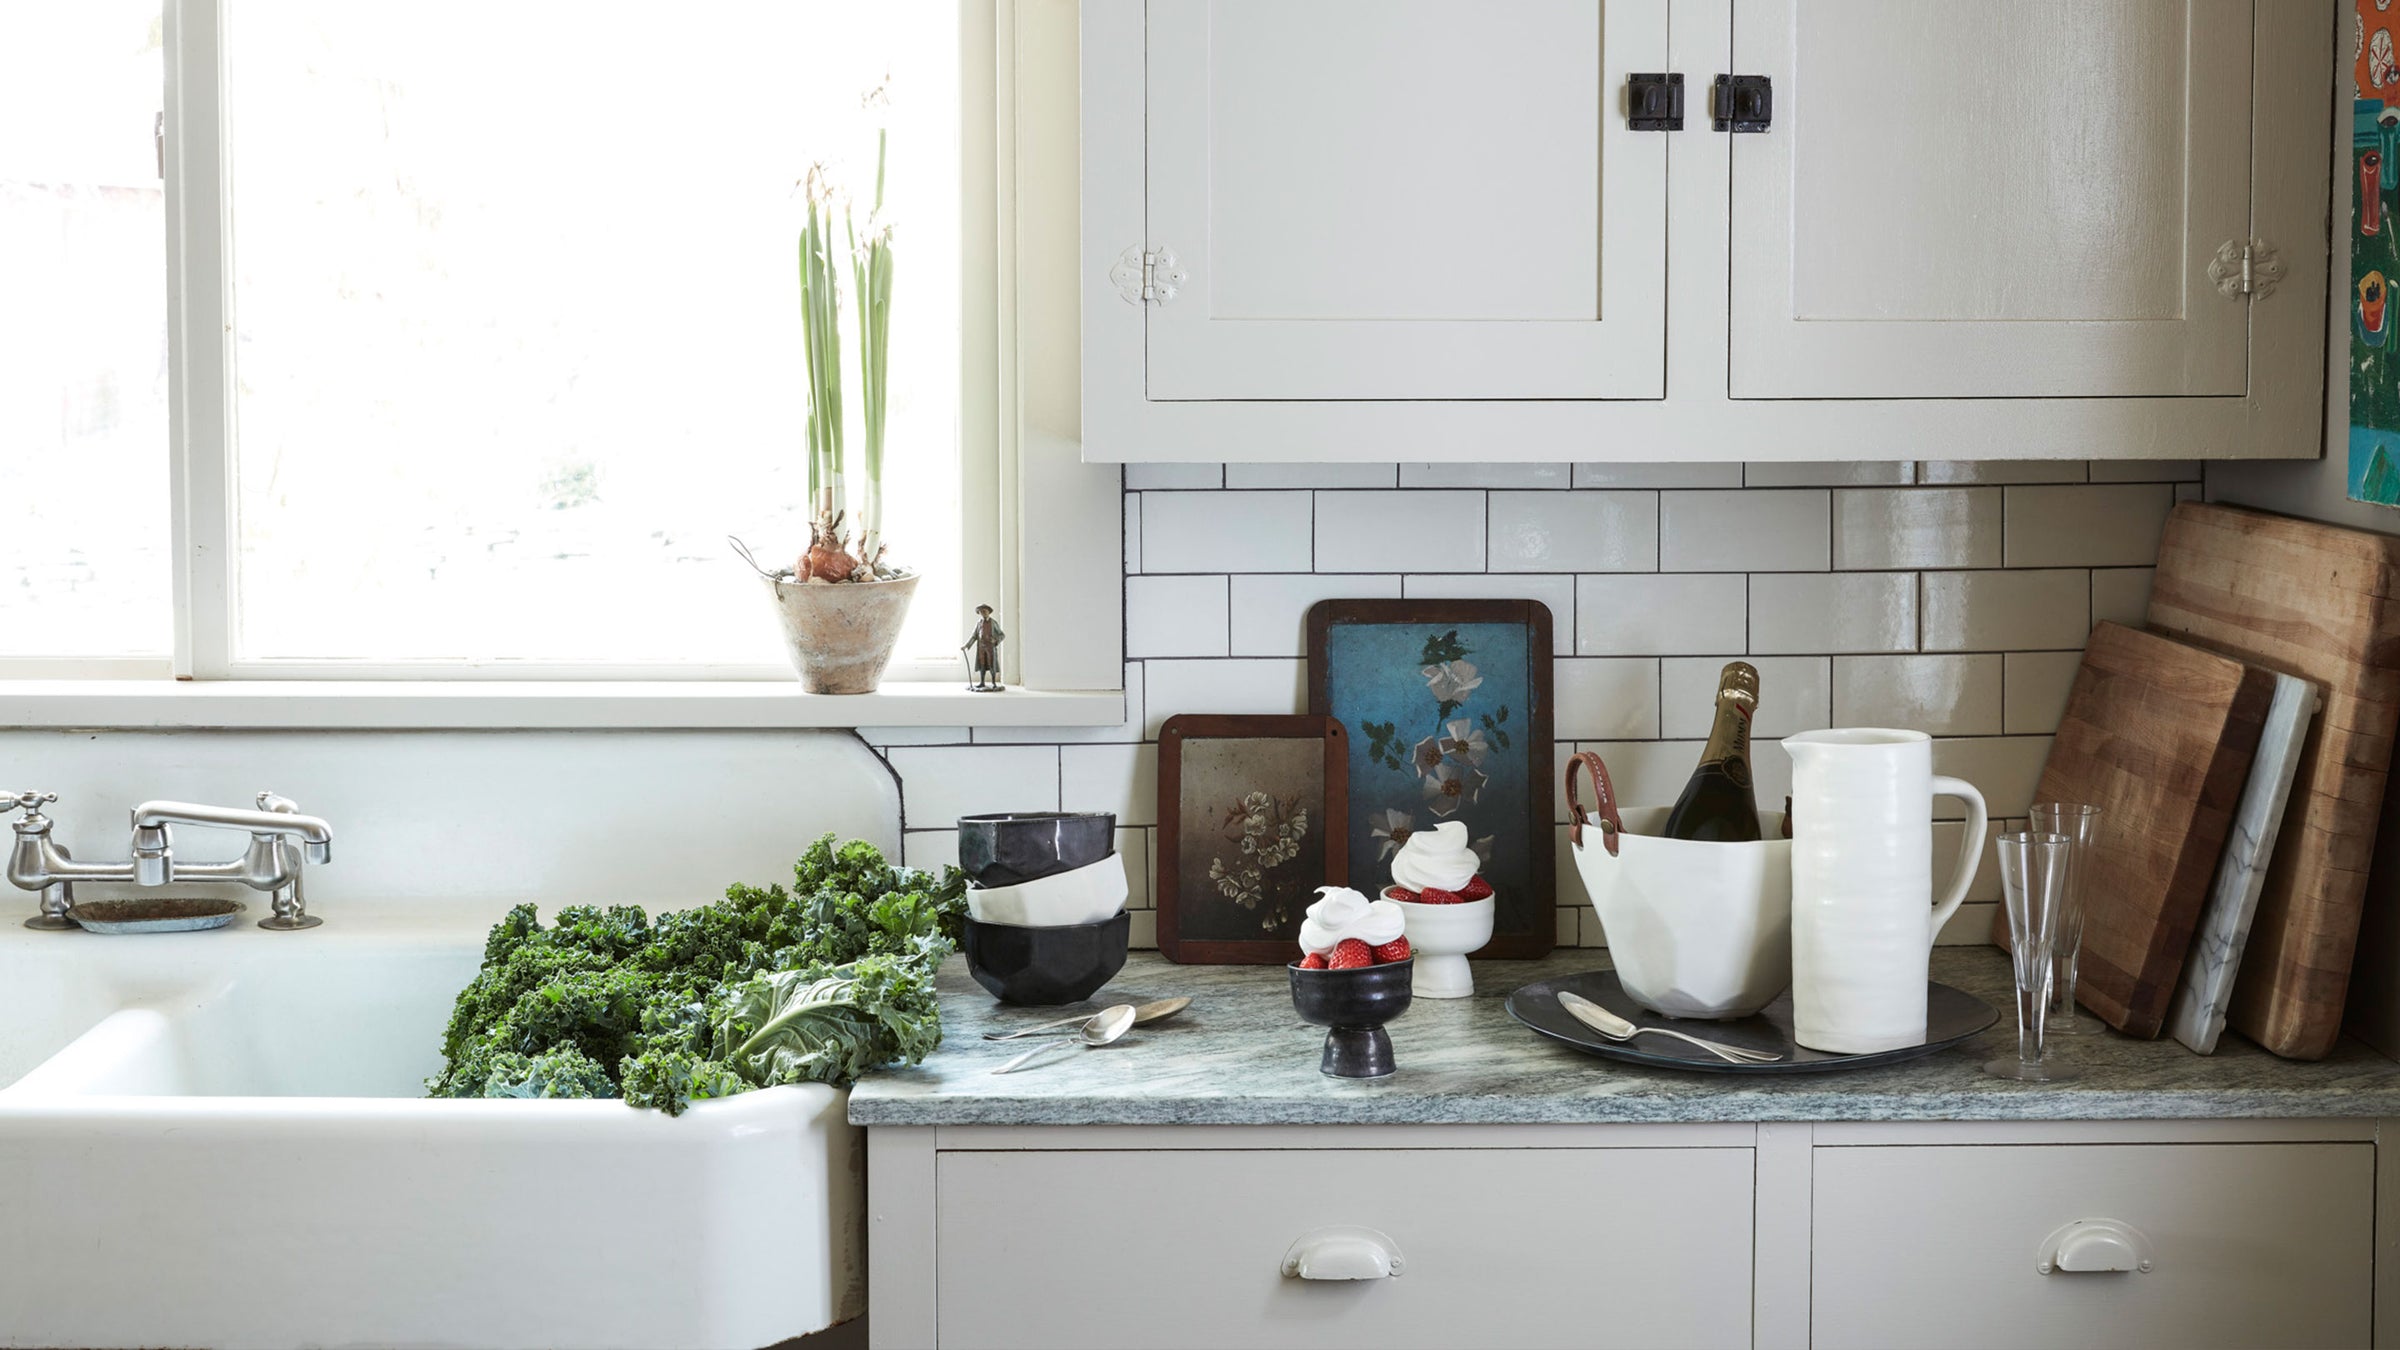 DBO HOME black and white artisan ceramic vessels, pitcher, serving bowls on a kitchen counter with subway tile and farm sink with kale